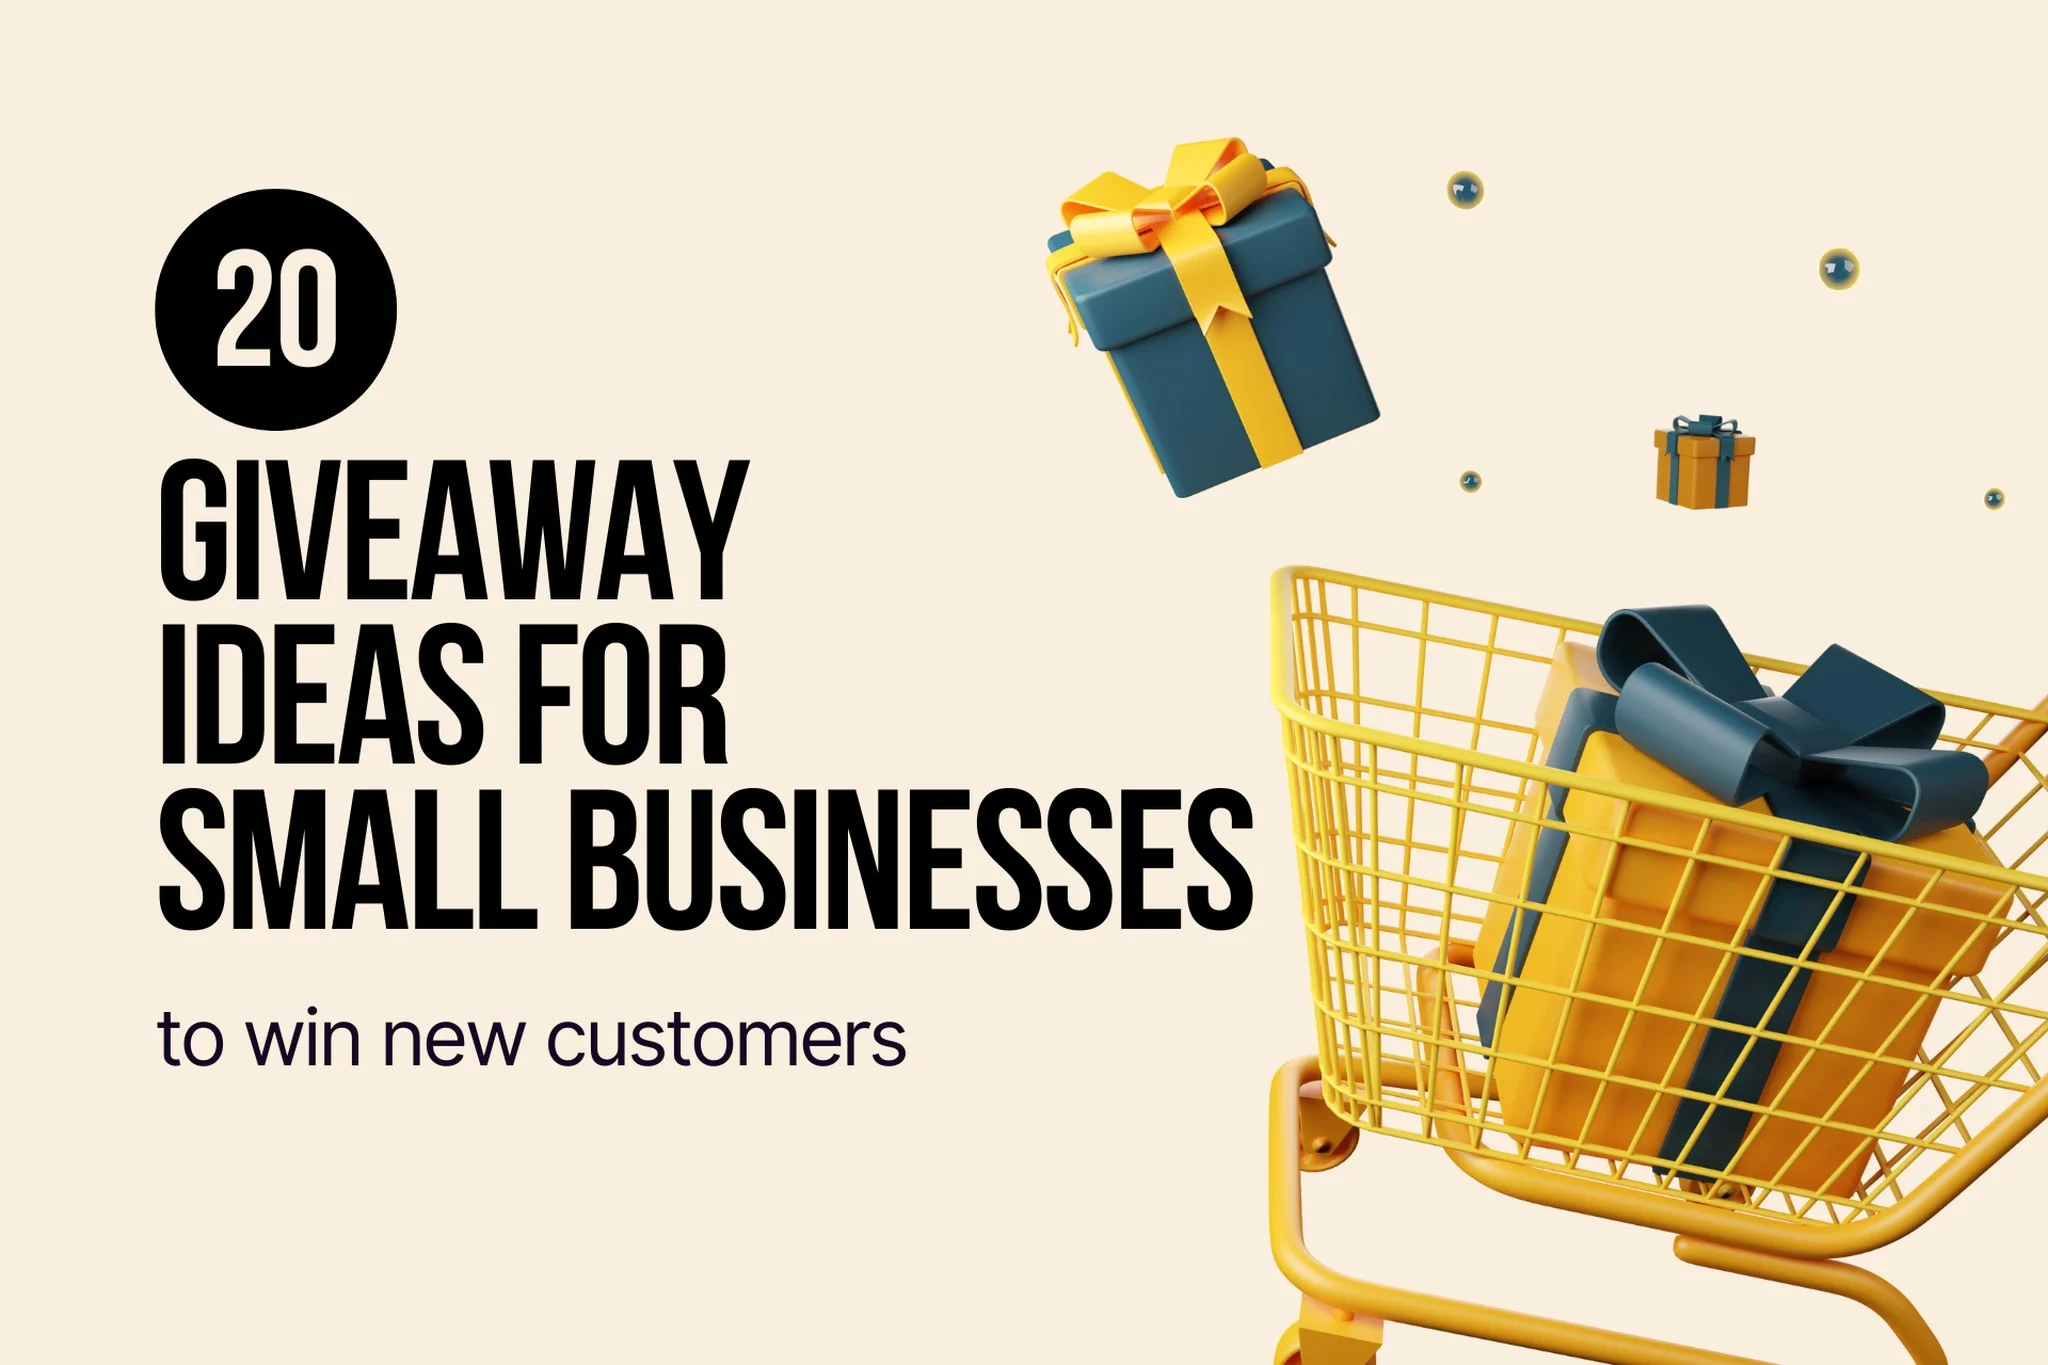 How To Do a Giveaway: 7 Tips To Drive Sales (2023)